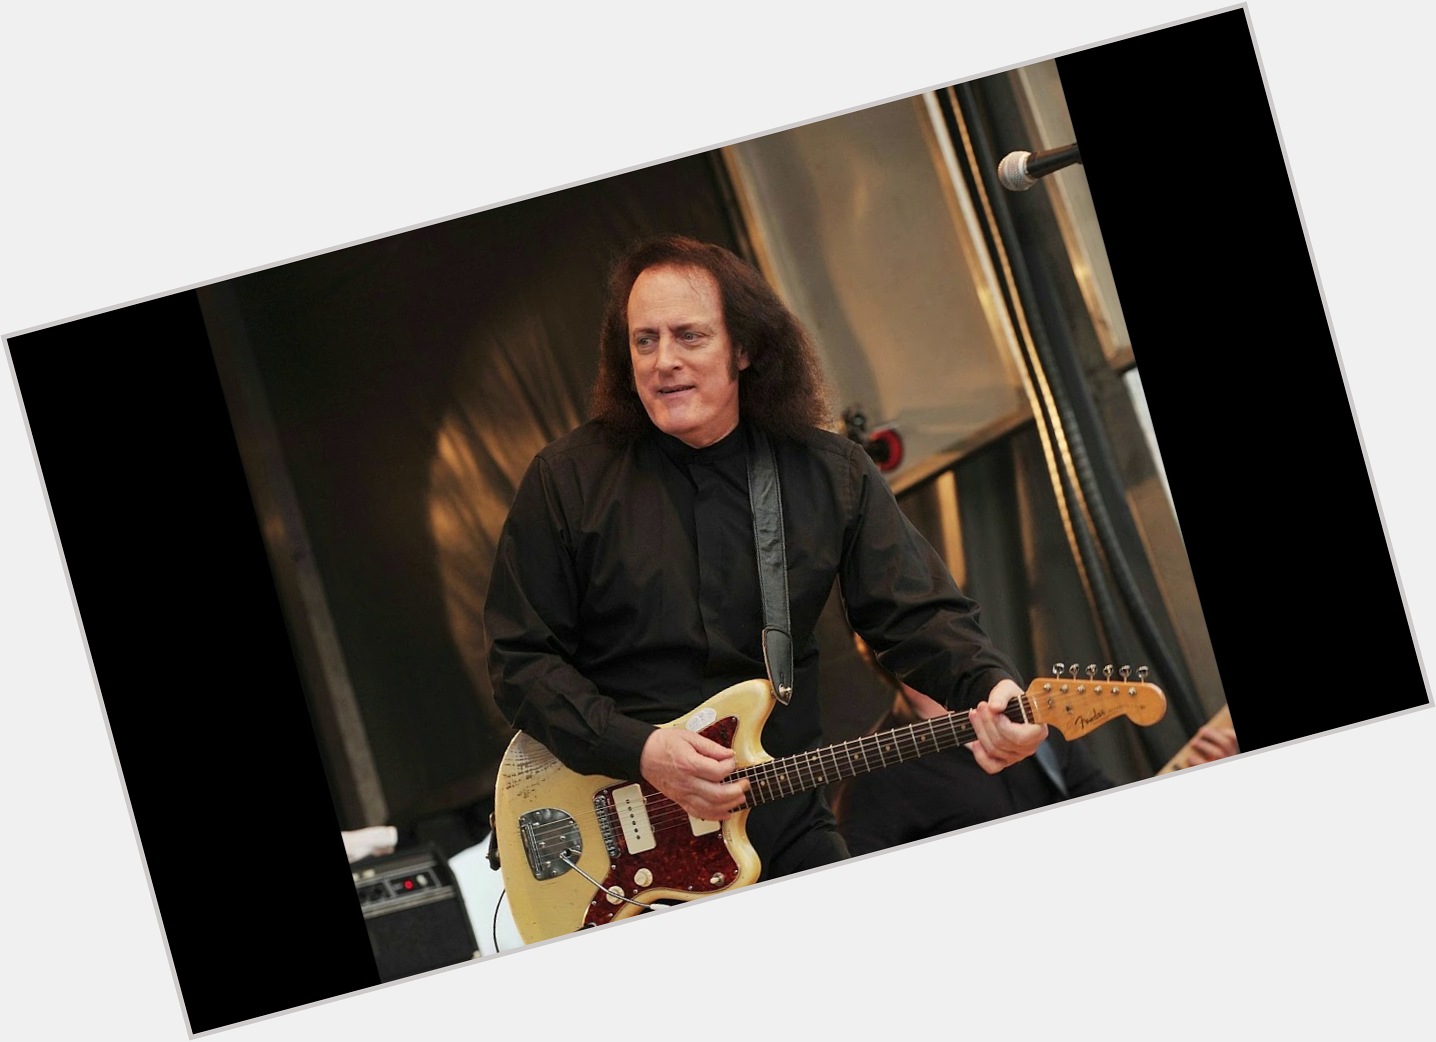 <a href="/hot-men/tommy-james/is-he-married-alive-still-christian-jehovahs-witness">Tommy James</a>  blonde hair & hairstyles